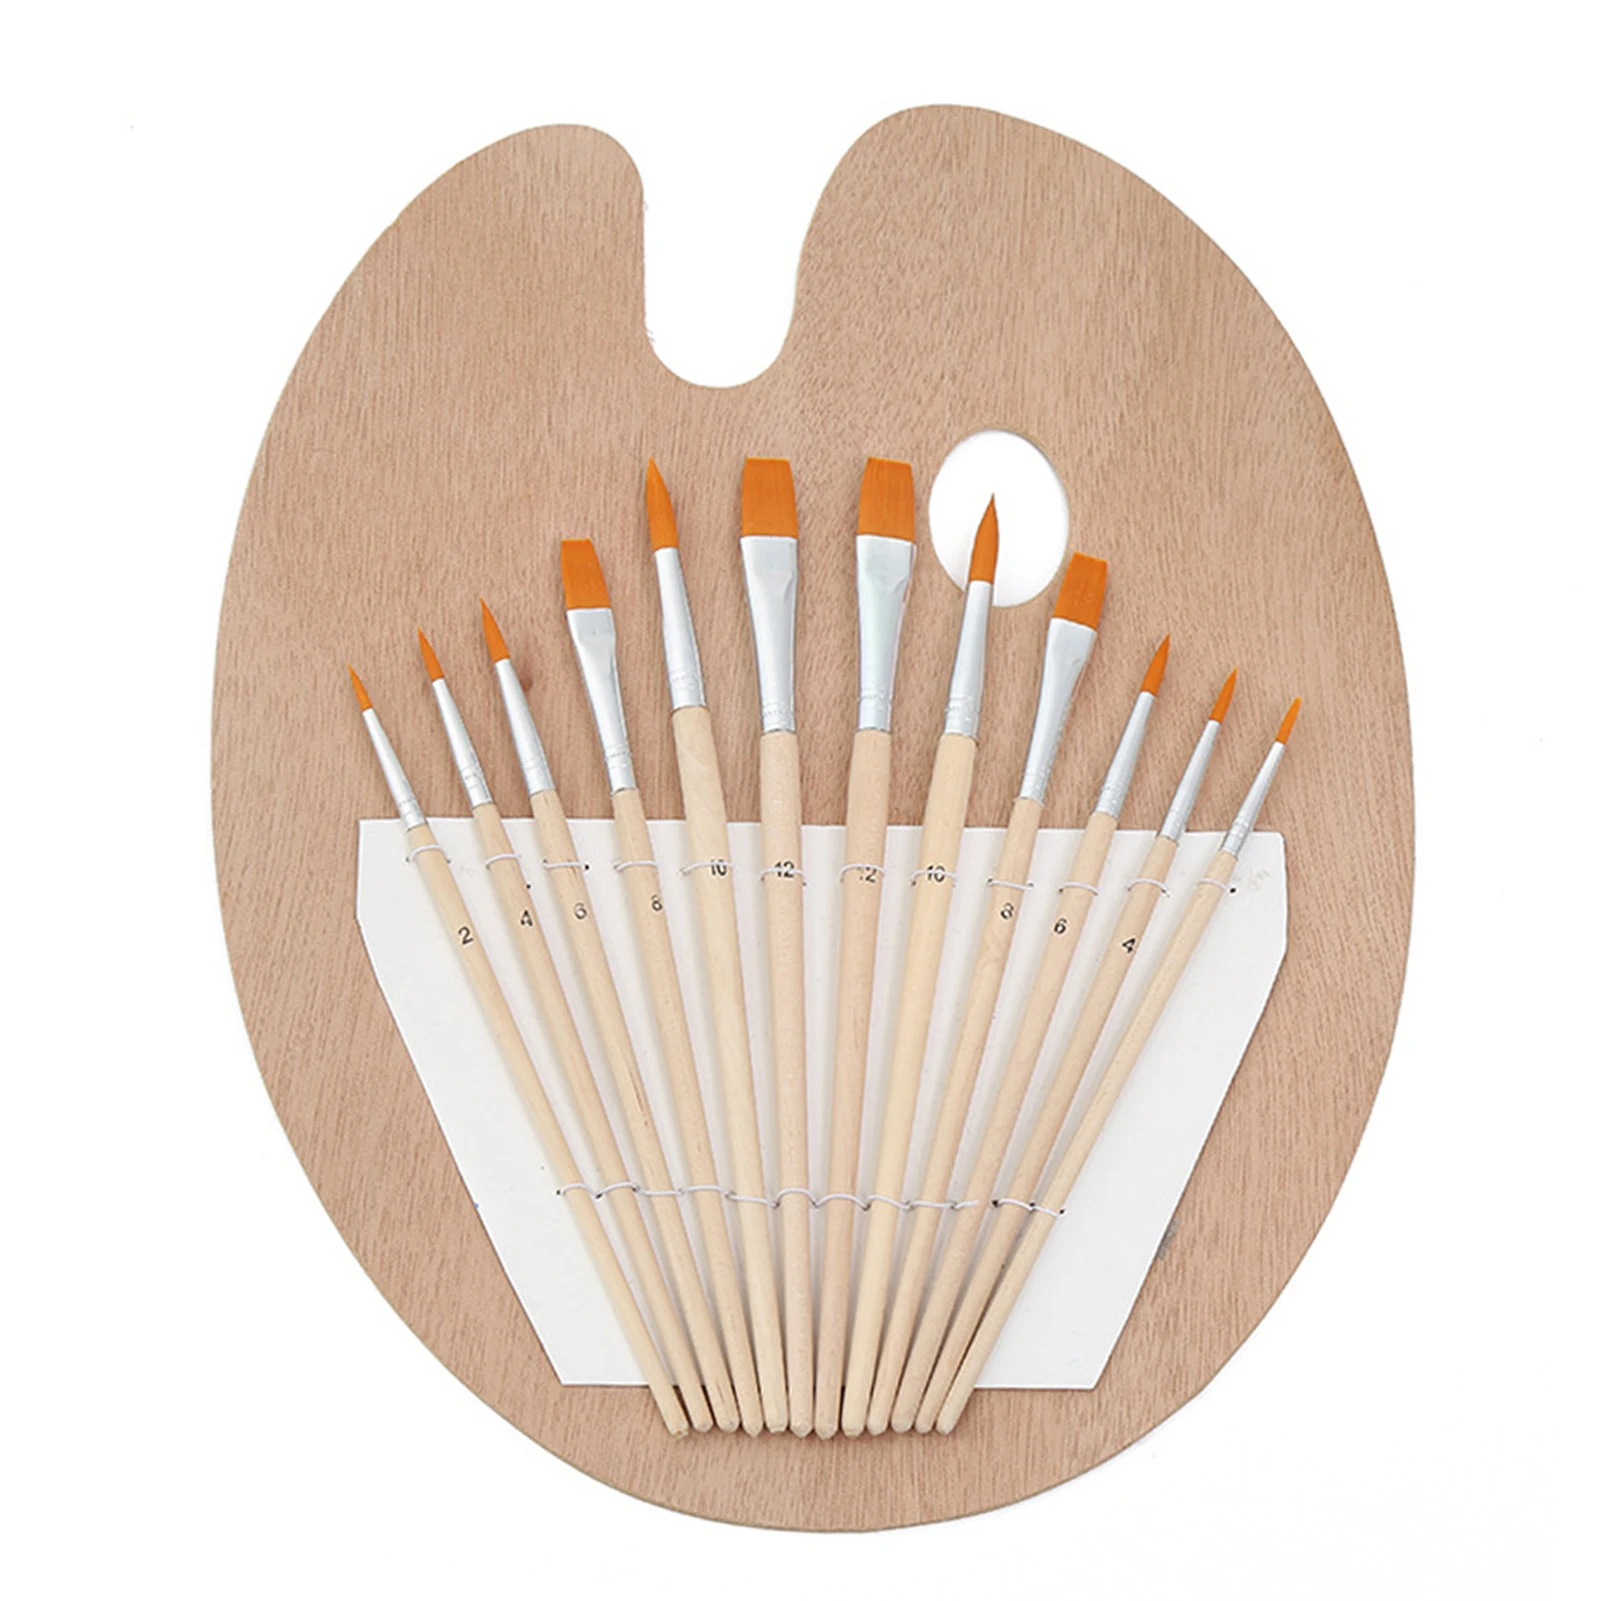 

Paint Palette And Brush Set For Watercolor Oil Paint Large Wooden Oval-Shaped Artist Color Mixing Tray With Thumb Hole 12Brushes